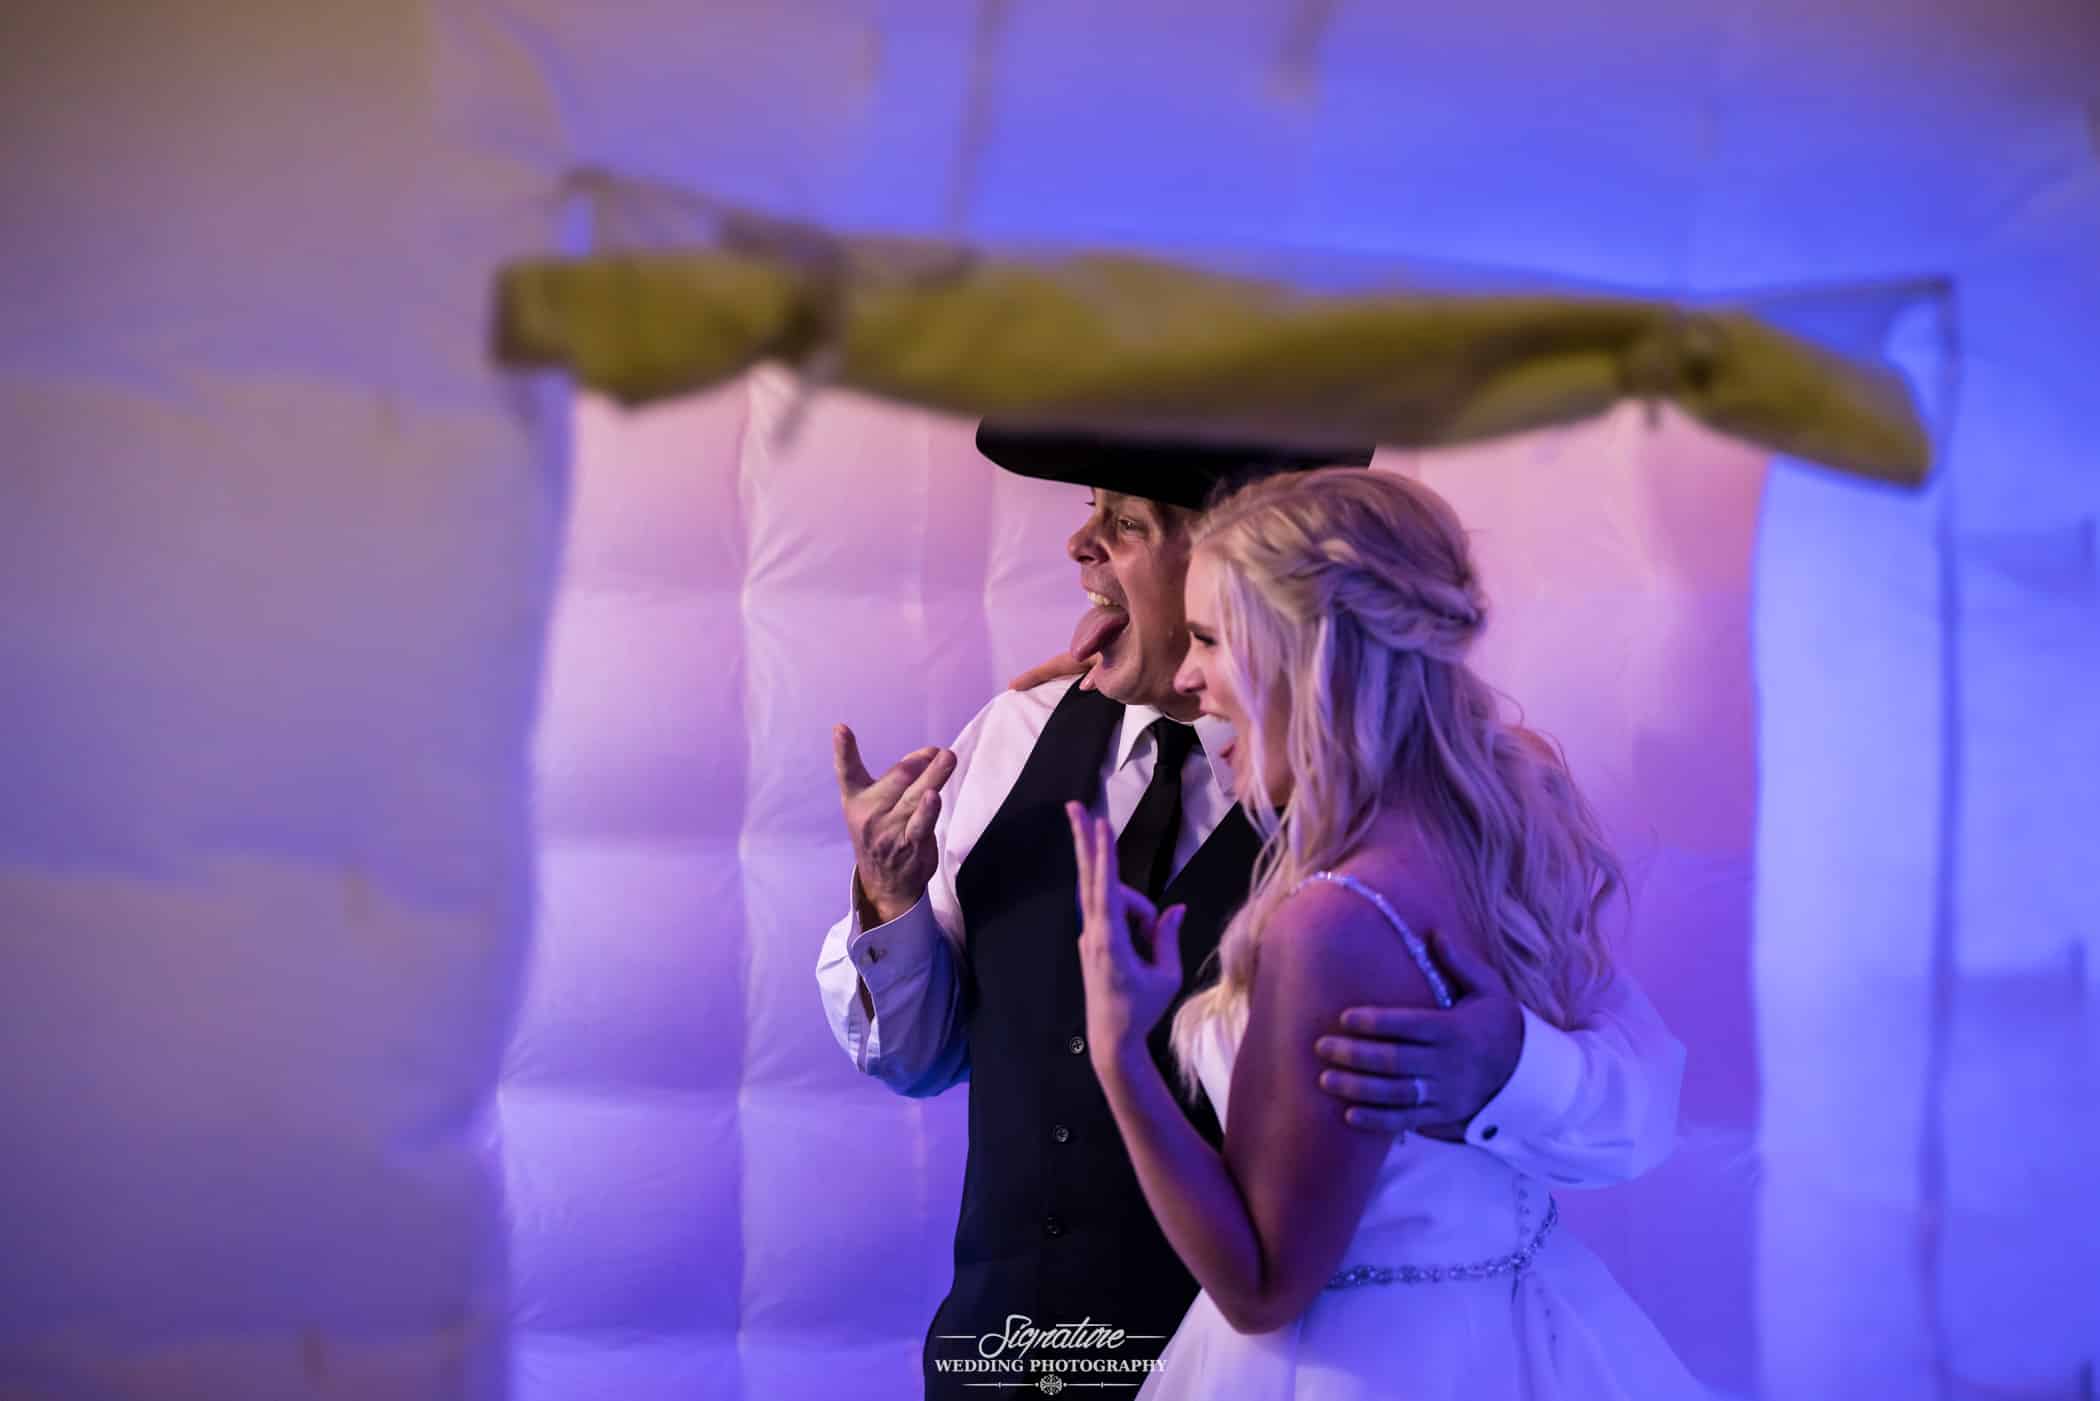 Bride and groom in photobooth